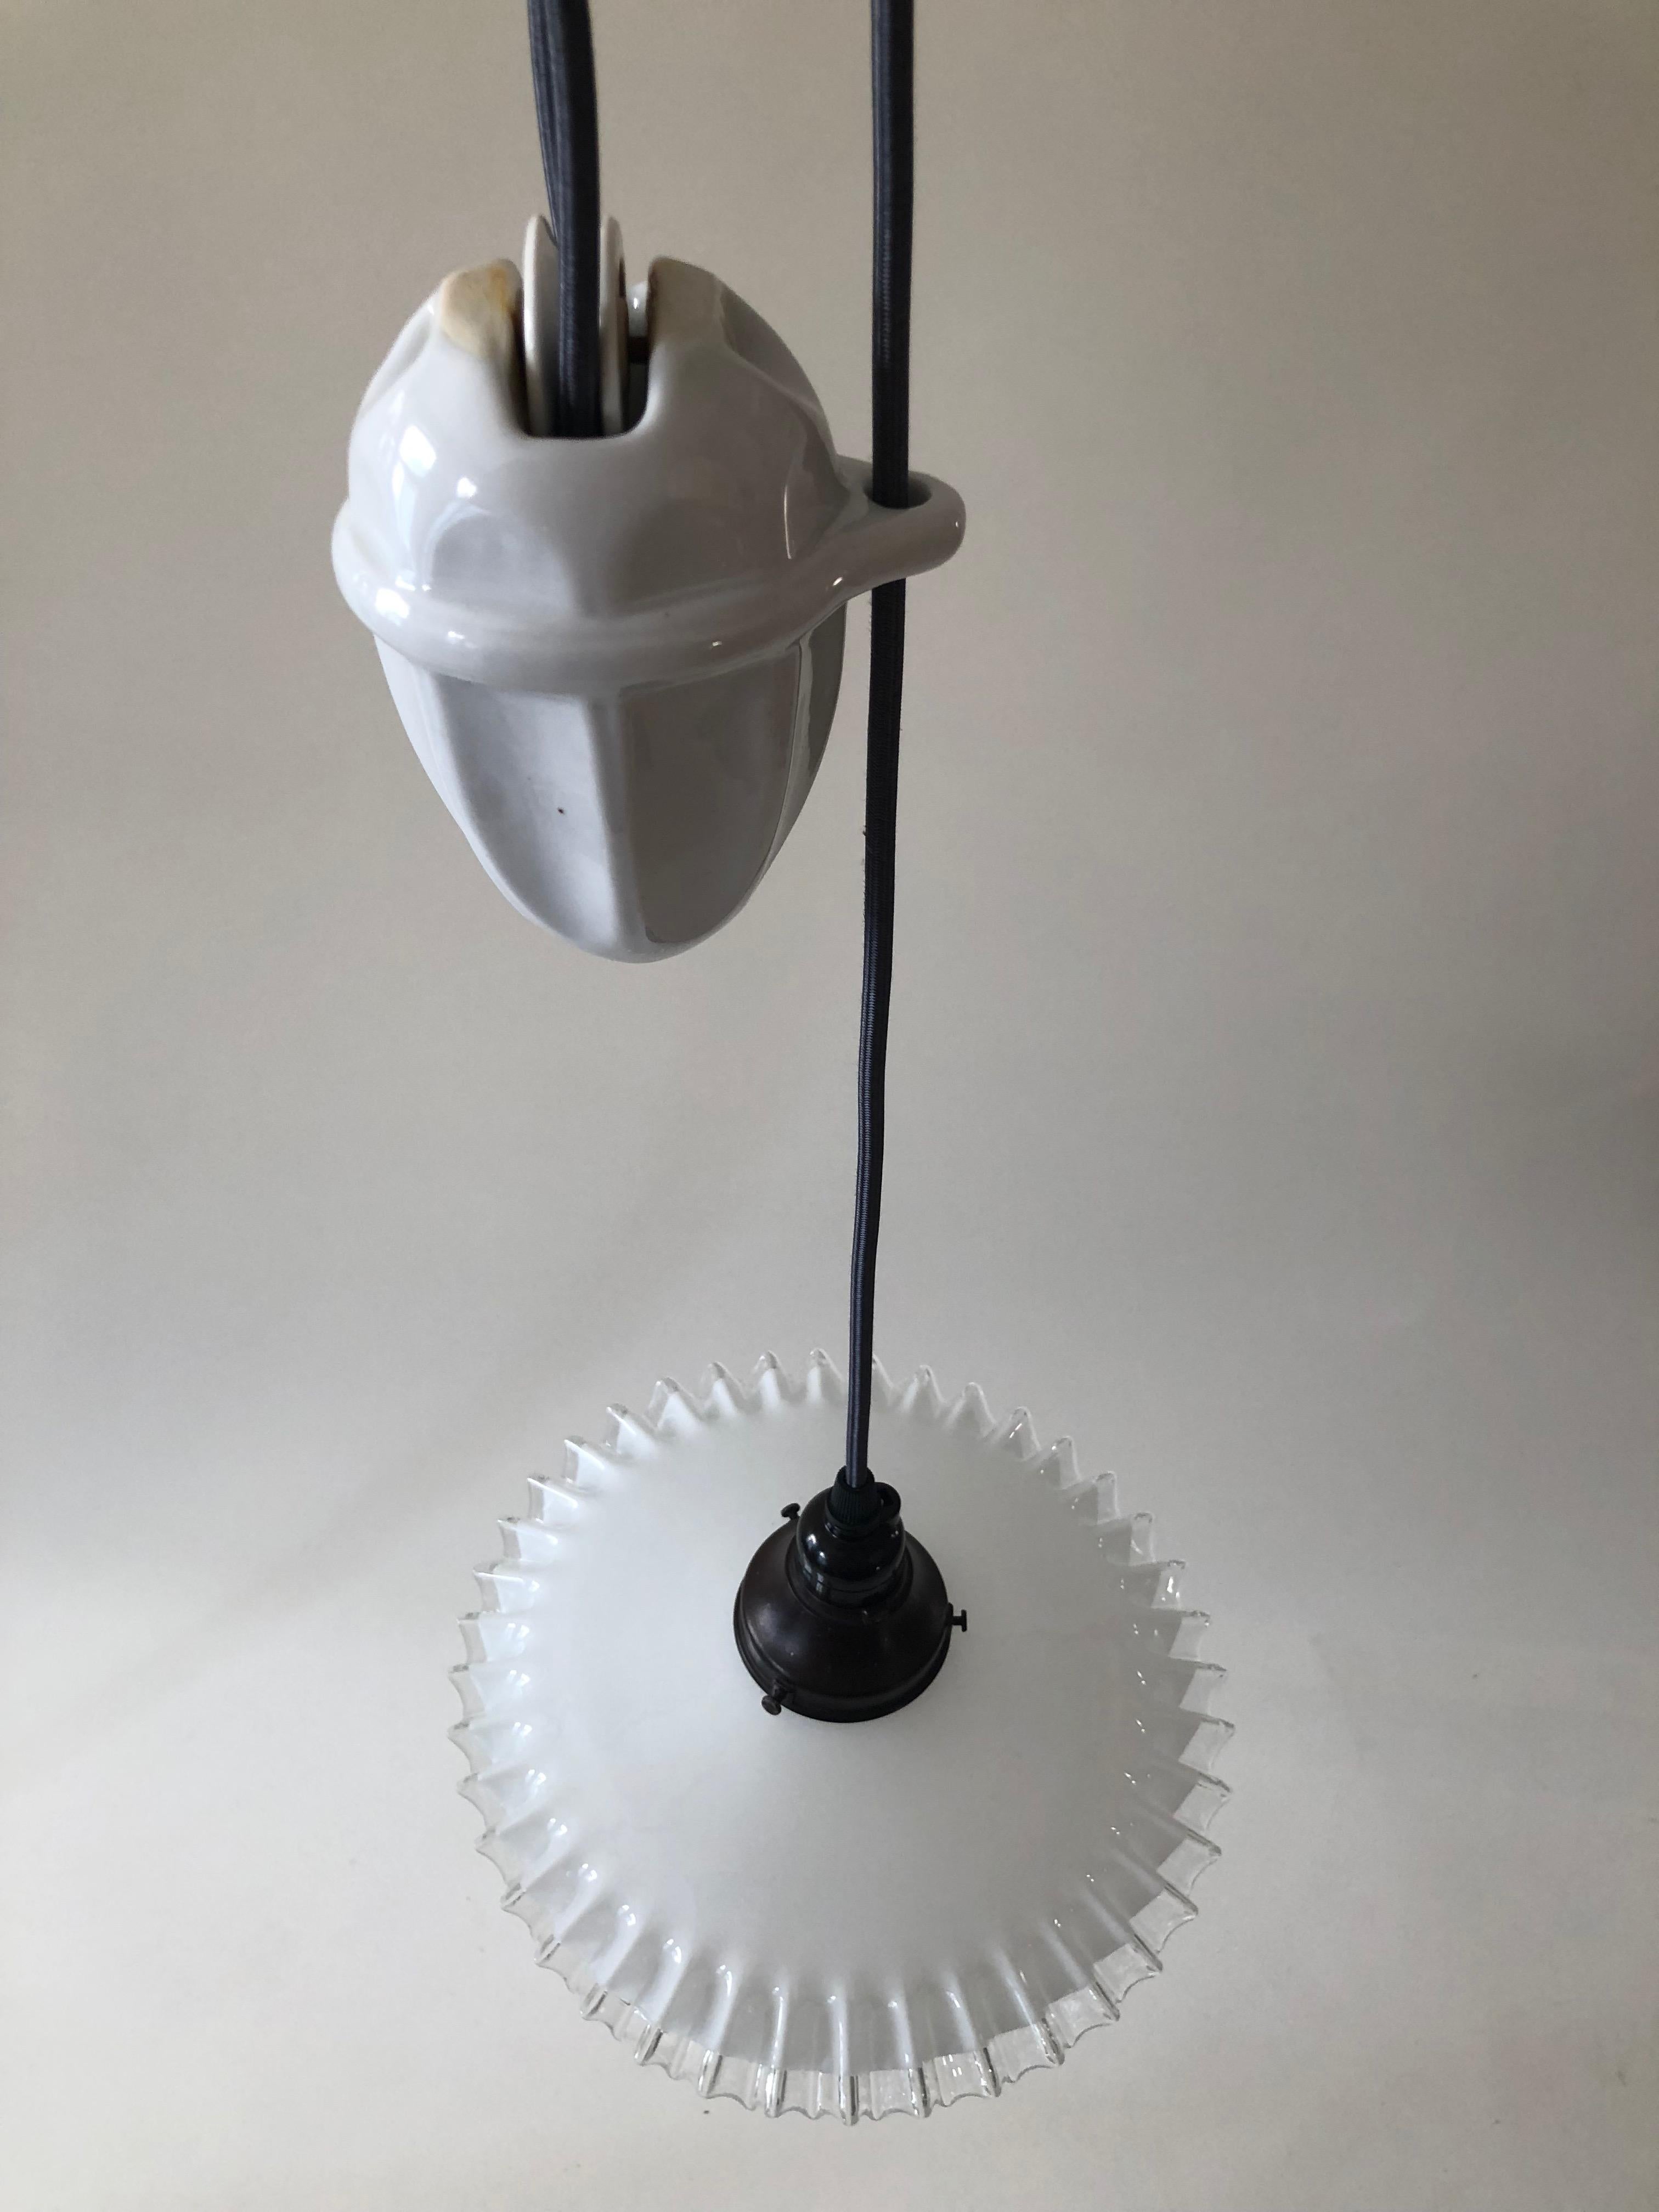 Austrian Counterweight Pendant Lamp, 1900, Made from Porcelain and Handmade Glass For Sale